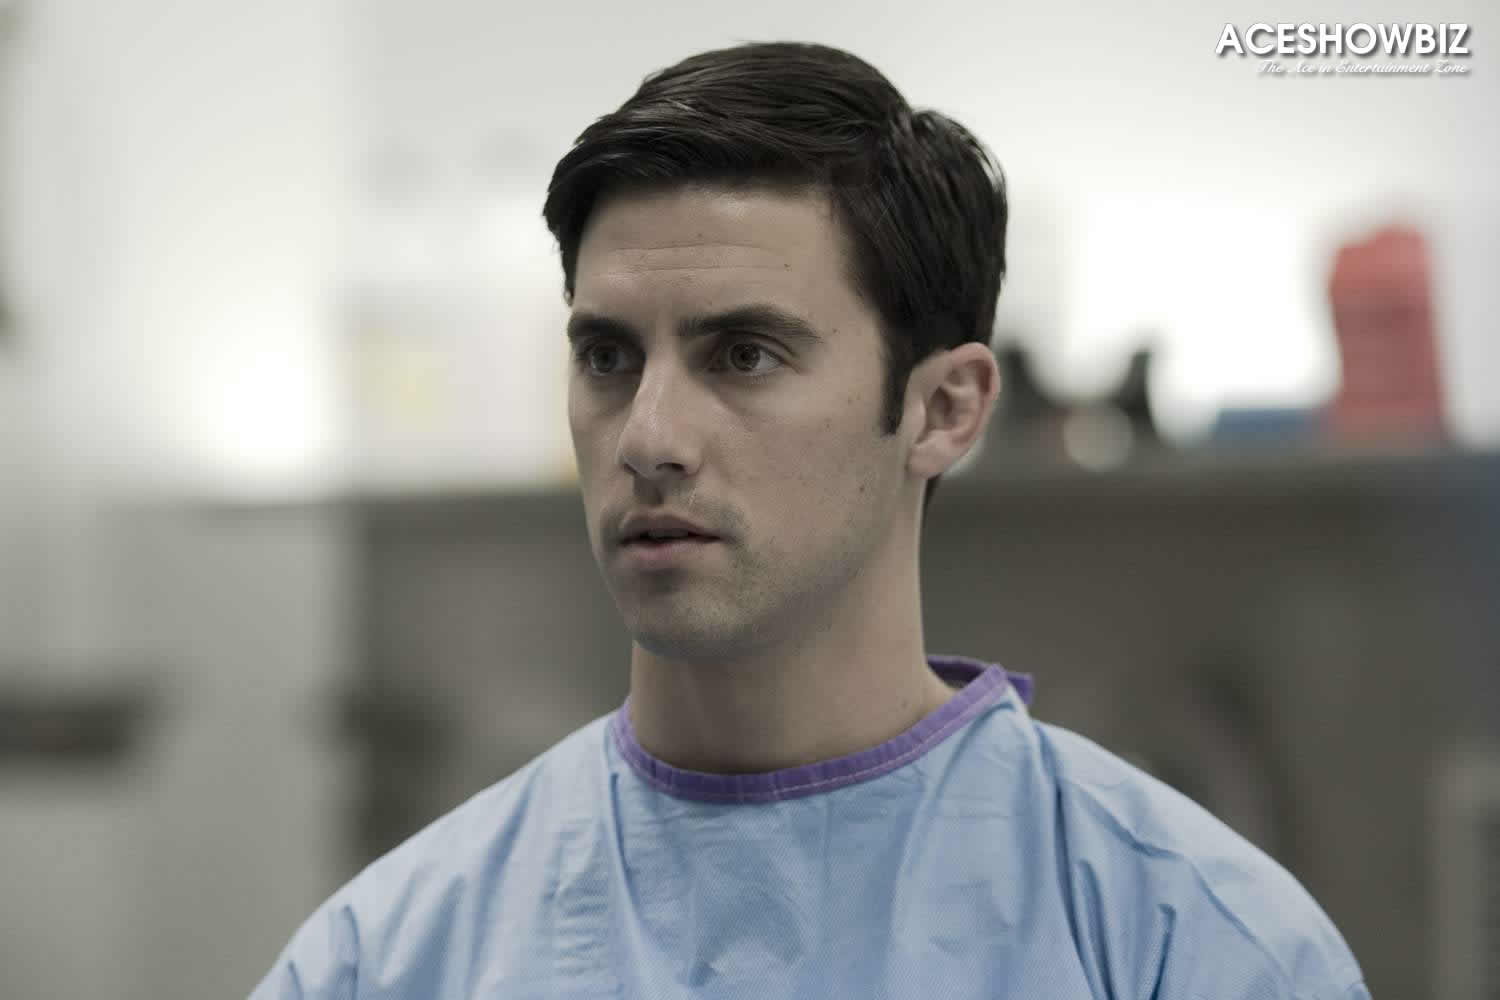 MILO VENTIMIGLIA stars as Ted Gray in the psychological thriller PATHOLOGY, distributed by MGM. Photo credit: Saeed Adyani.